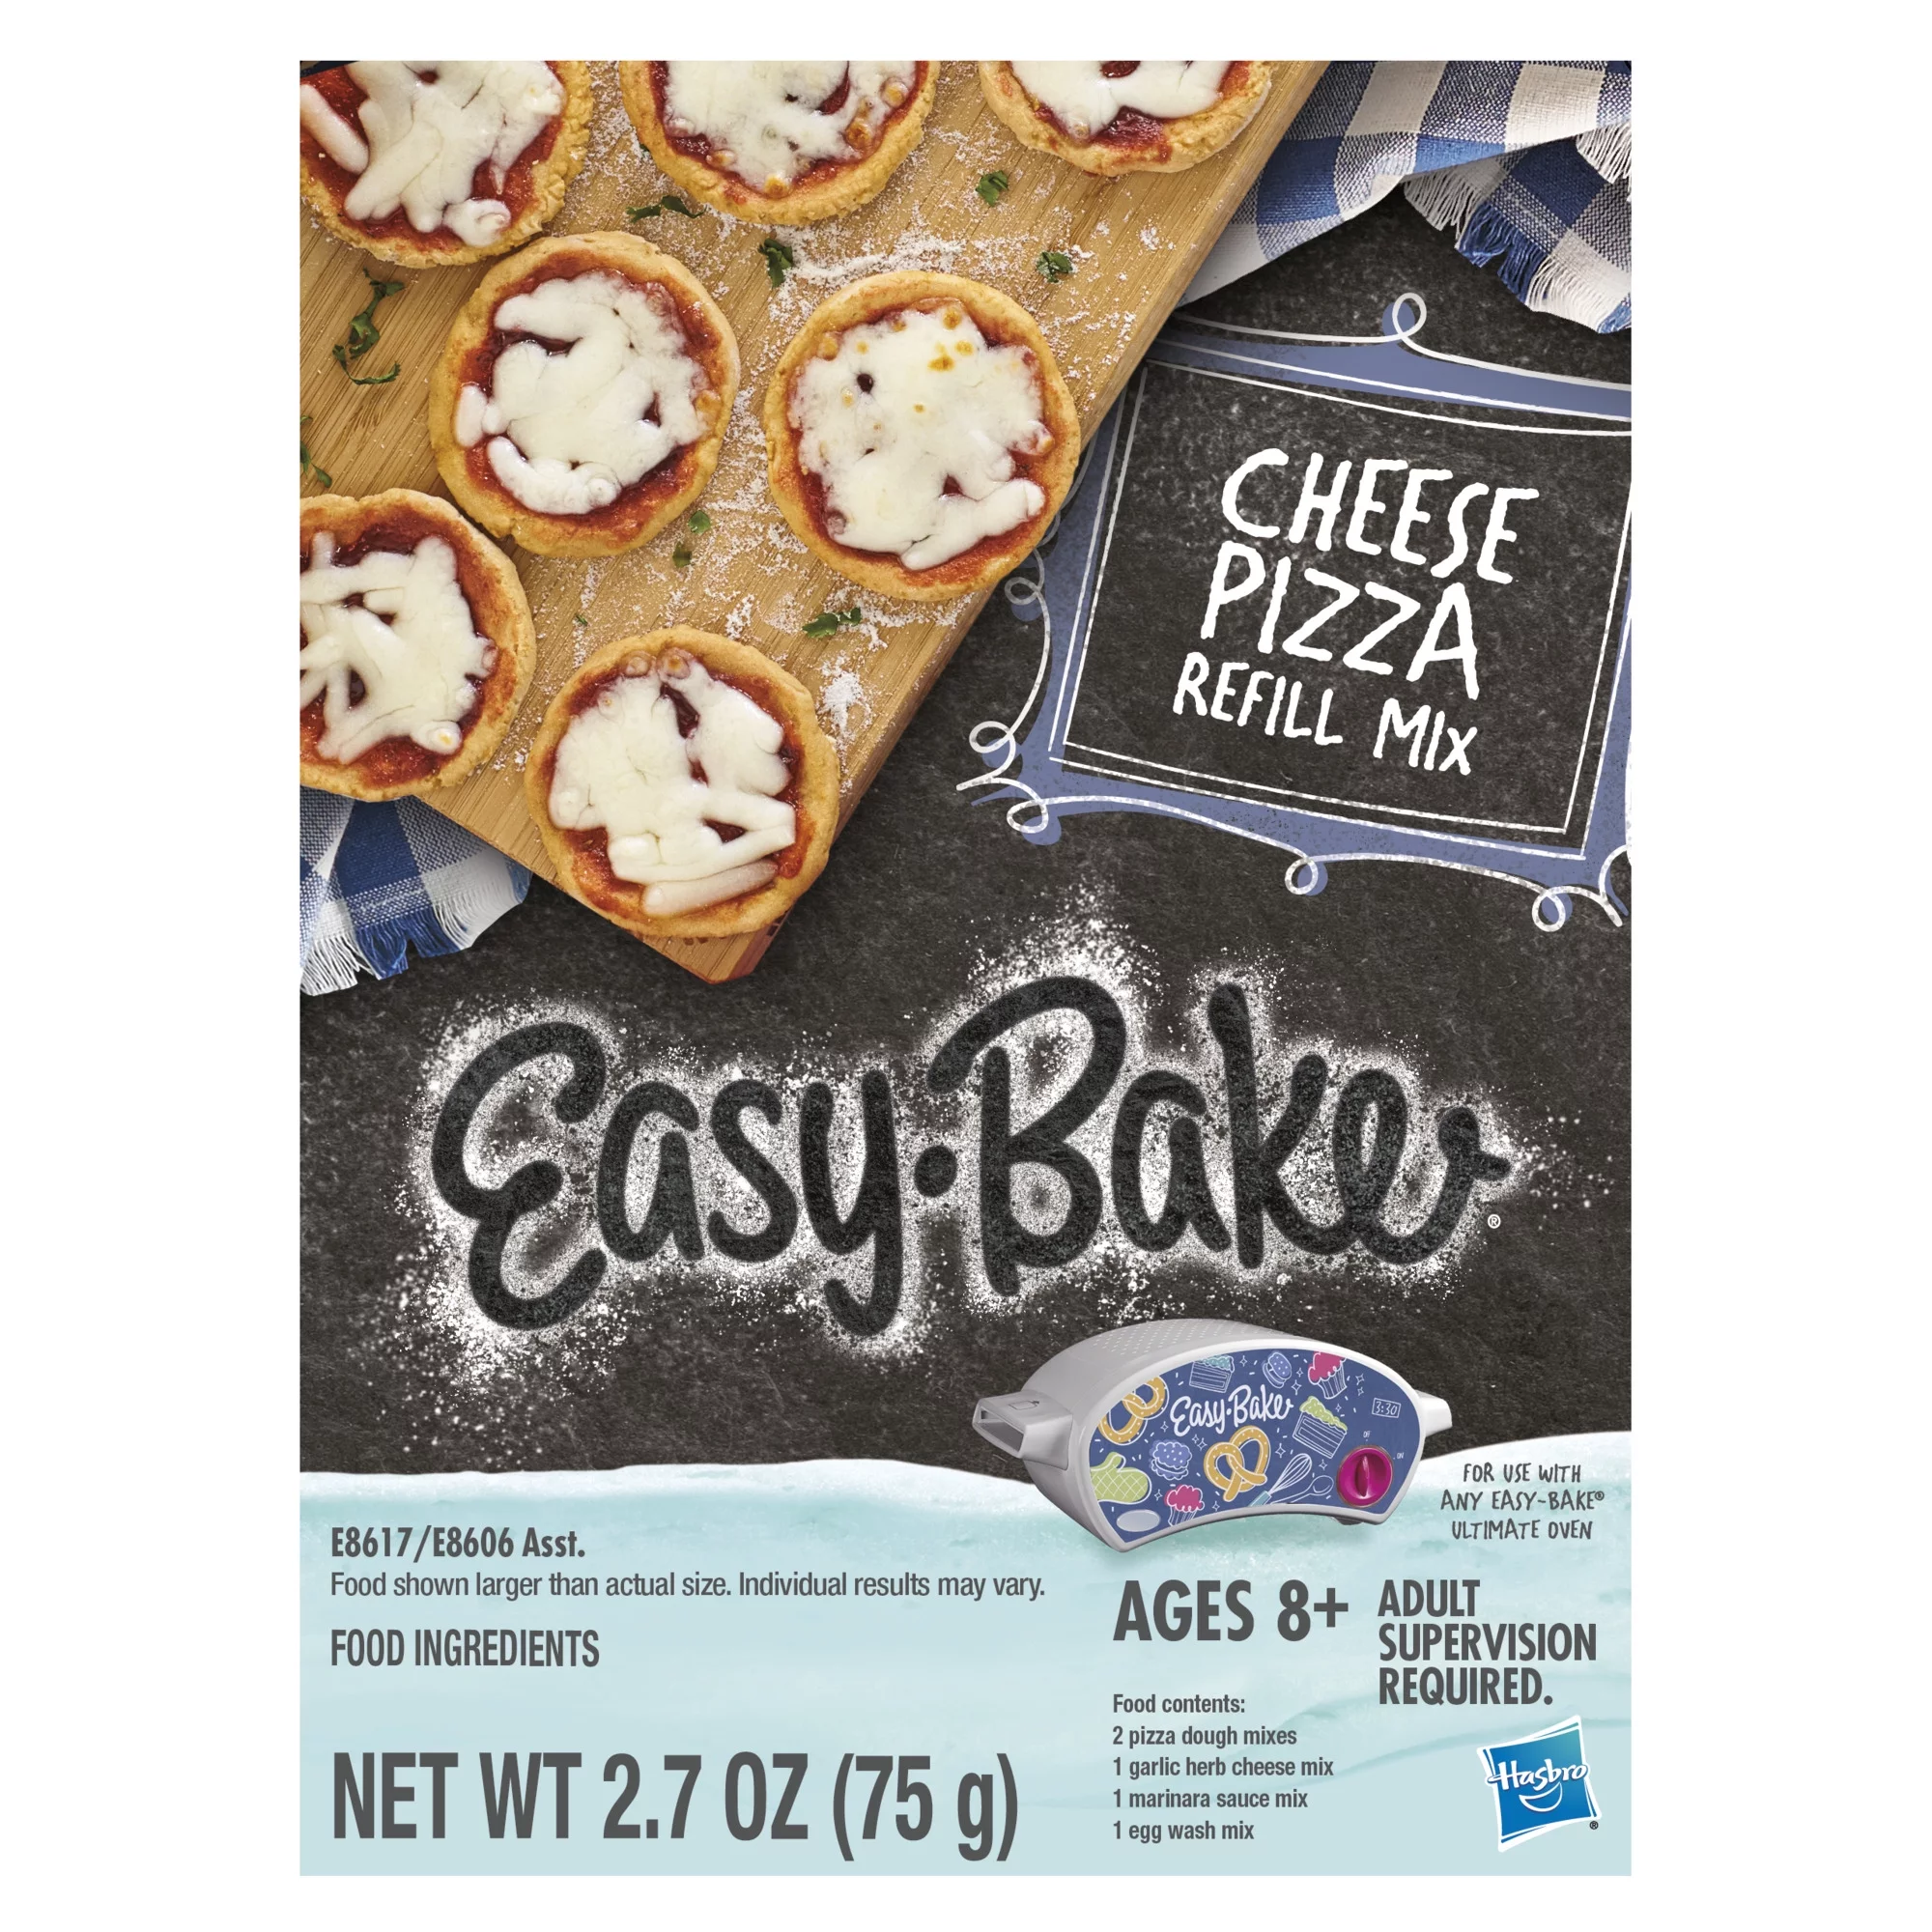 Easy-Bake Ultimate Oven Toy Refill Mix, Cheese Pizza 2.7 oz., Ages 8 and Up